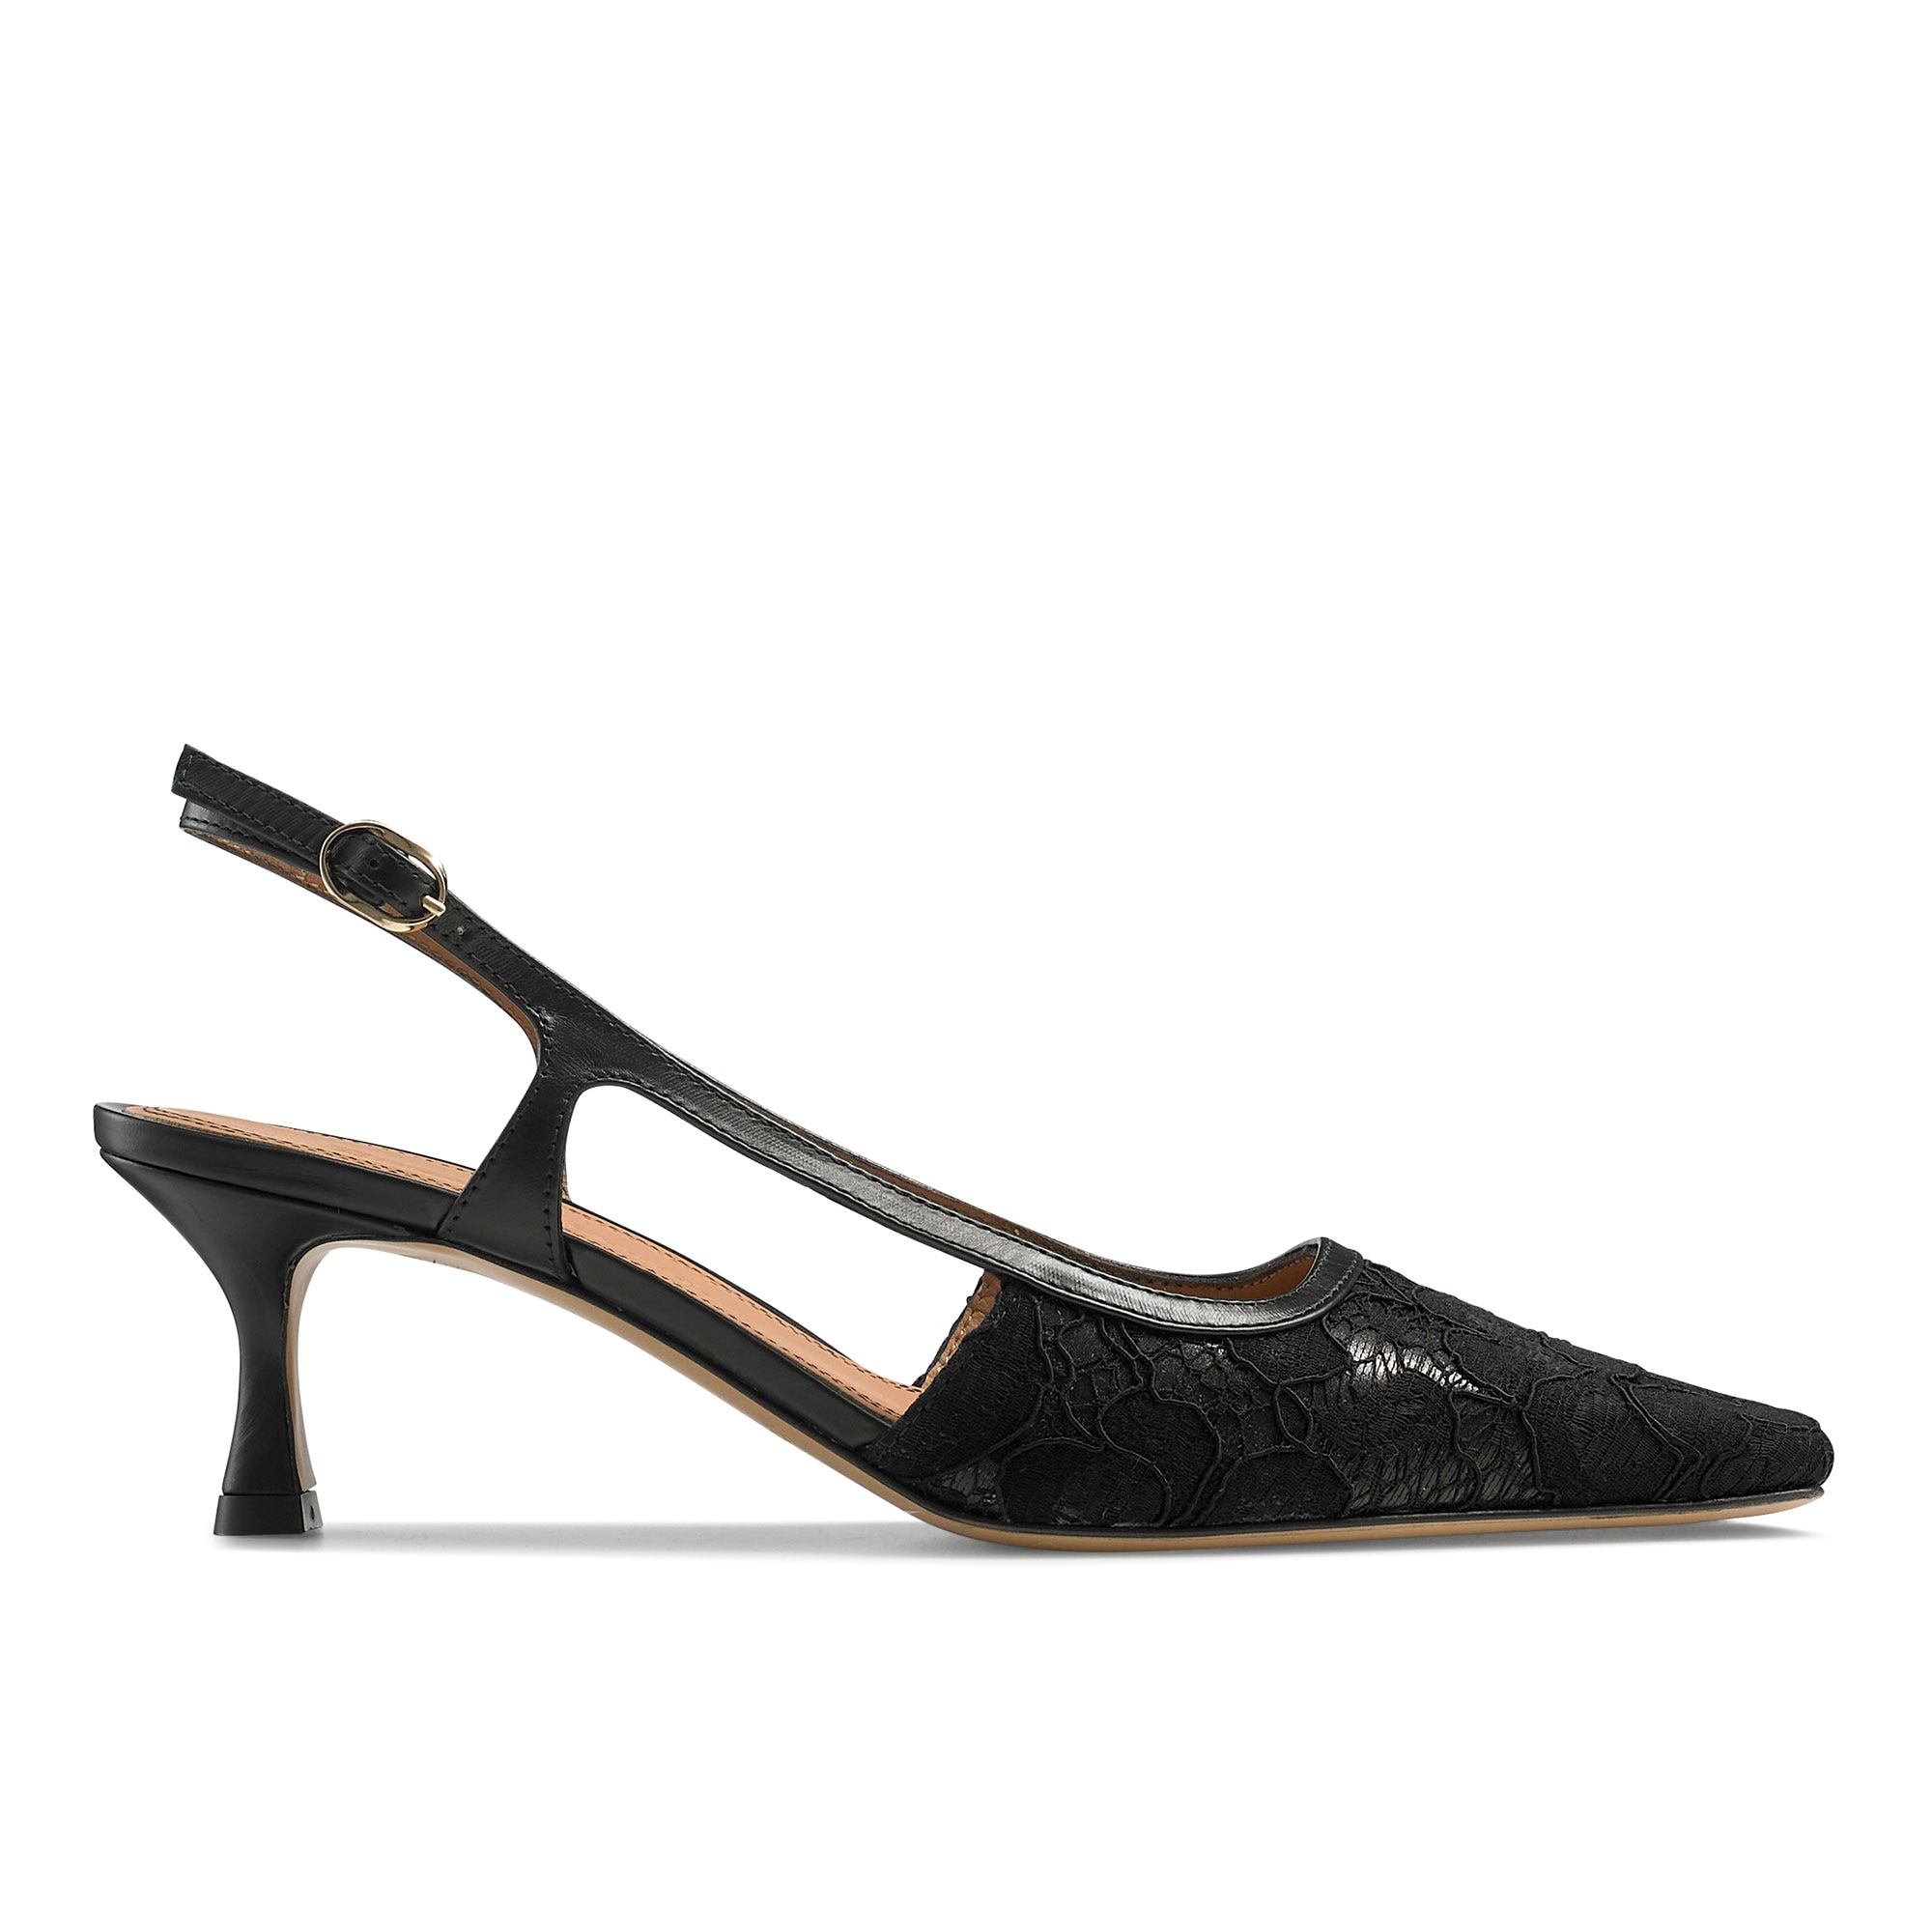 Russell and Bromley Snipped heels in black